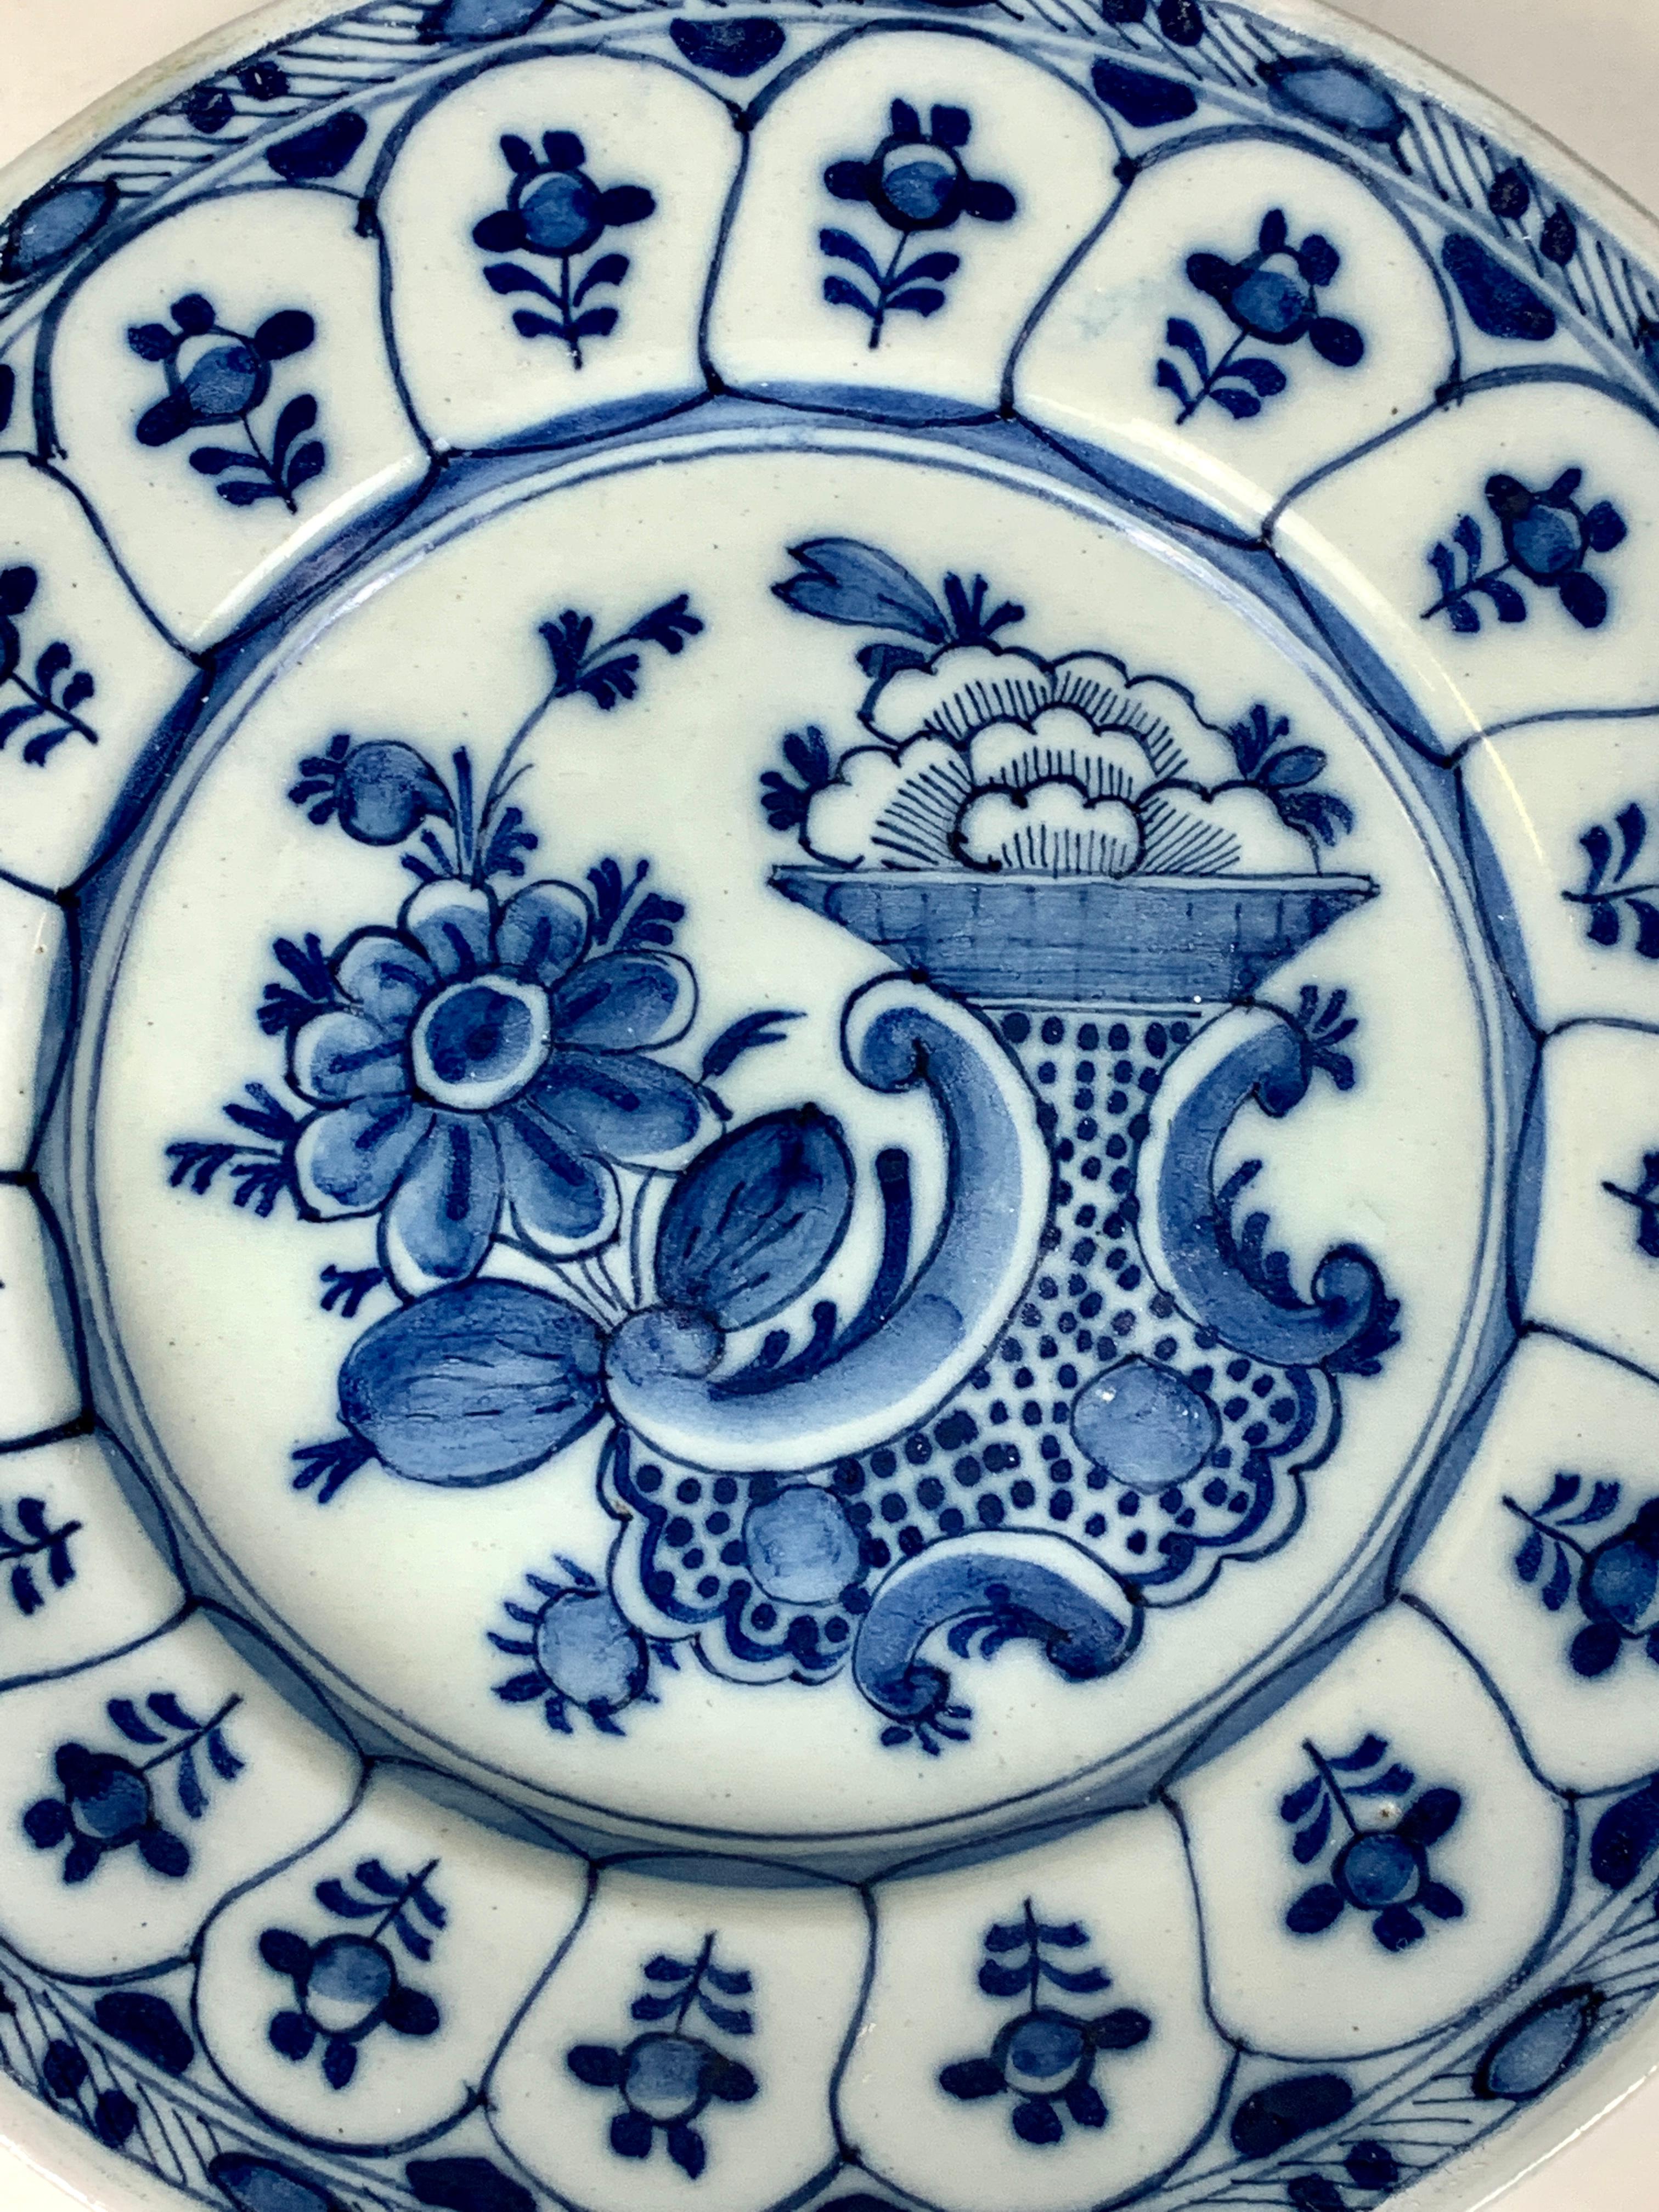 This blue and white hand-painted Dutch Delft dish was made in the Netherlands in the 18th century, circa 1780. 
The composition has excellent movement. The center shows flowers and a Rococo vase with curving outlines. 
Seventeen panels encircle the